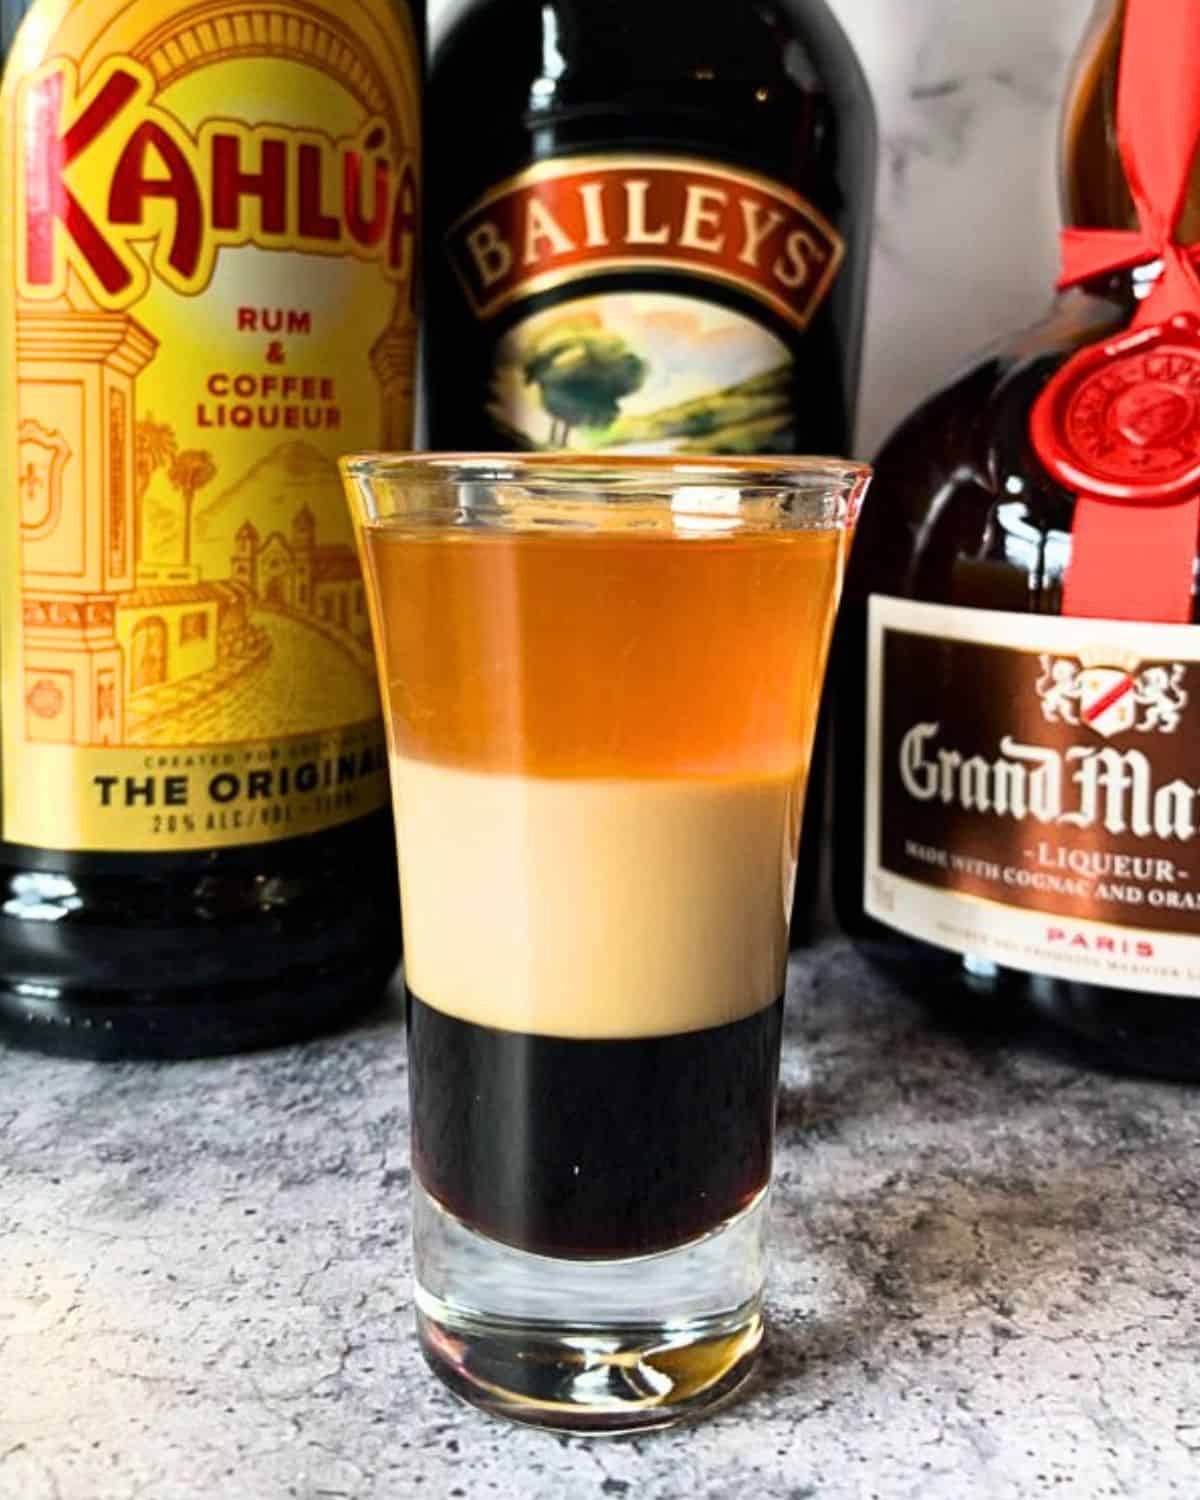 B-52 shot in front of Kahlua, Baileys, and Grand Marnier.